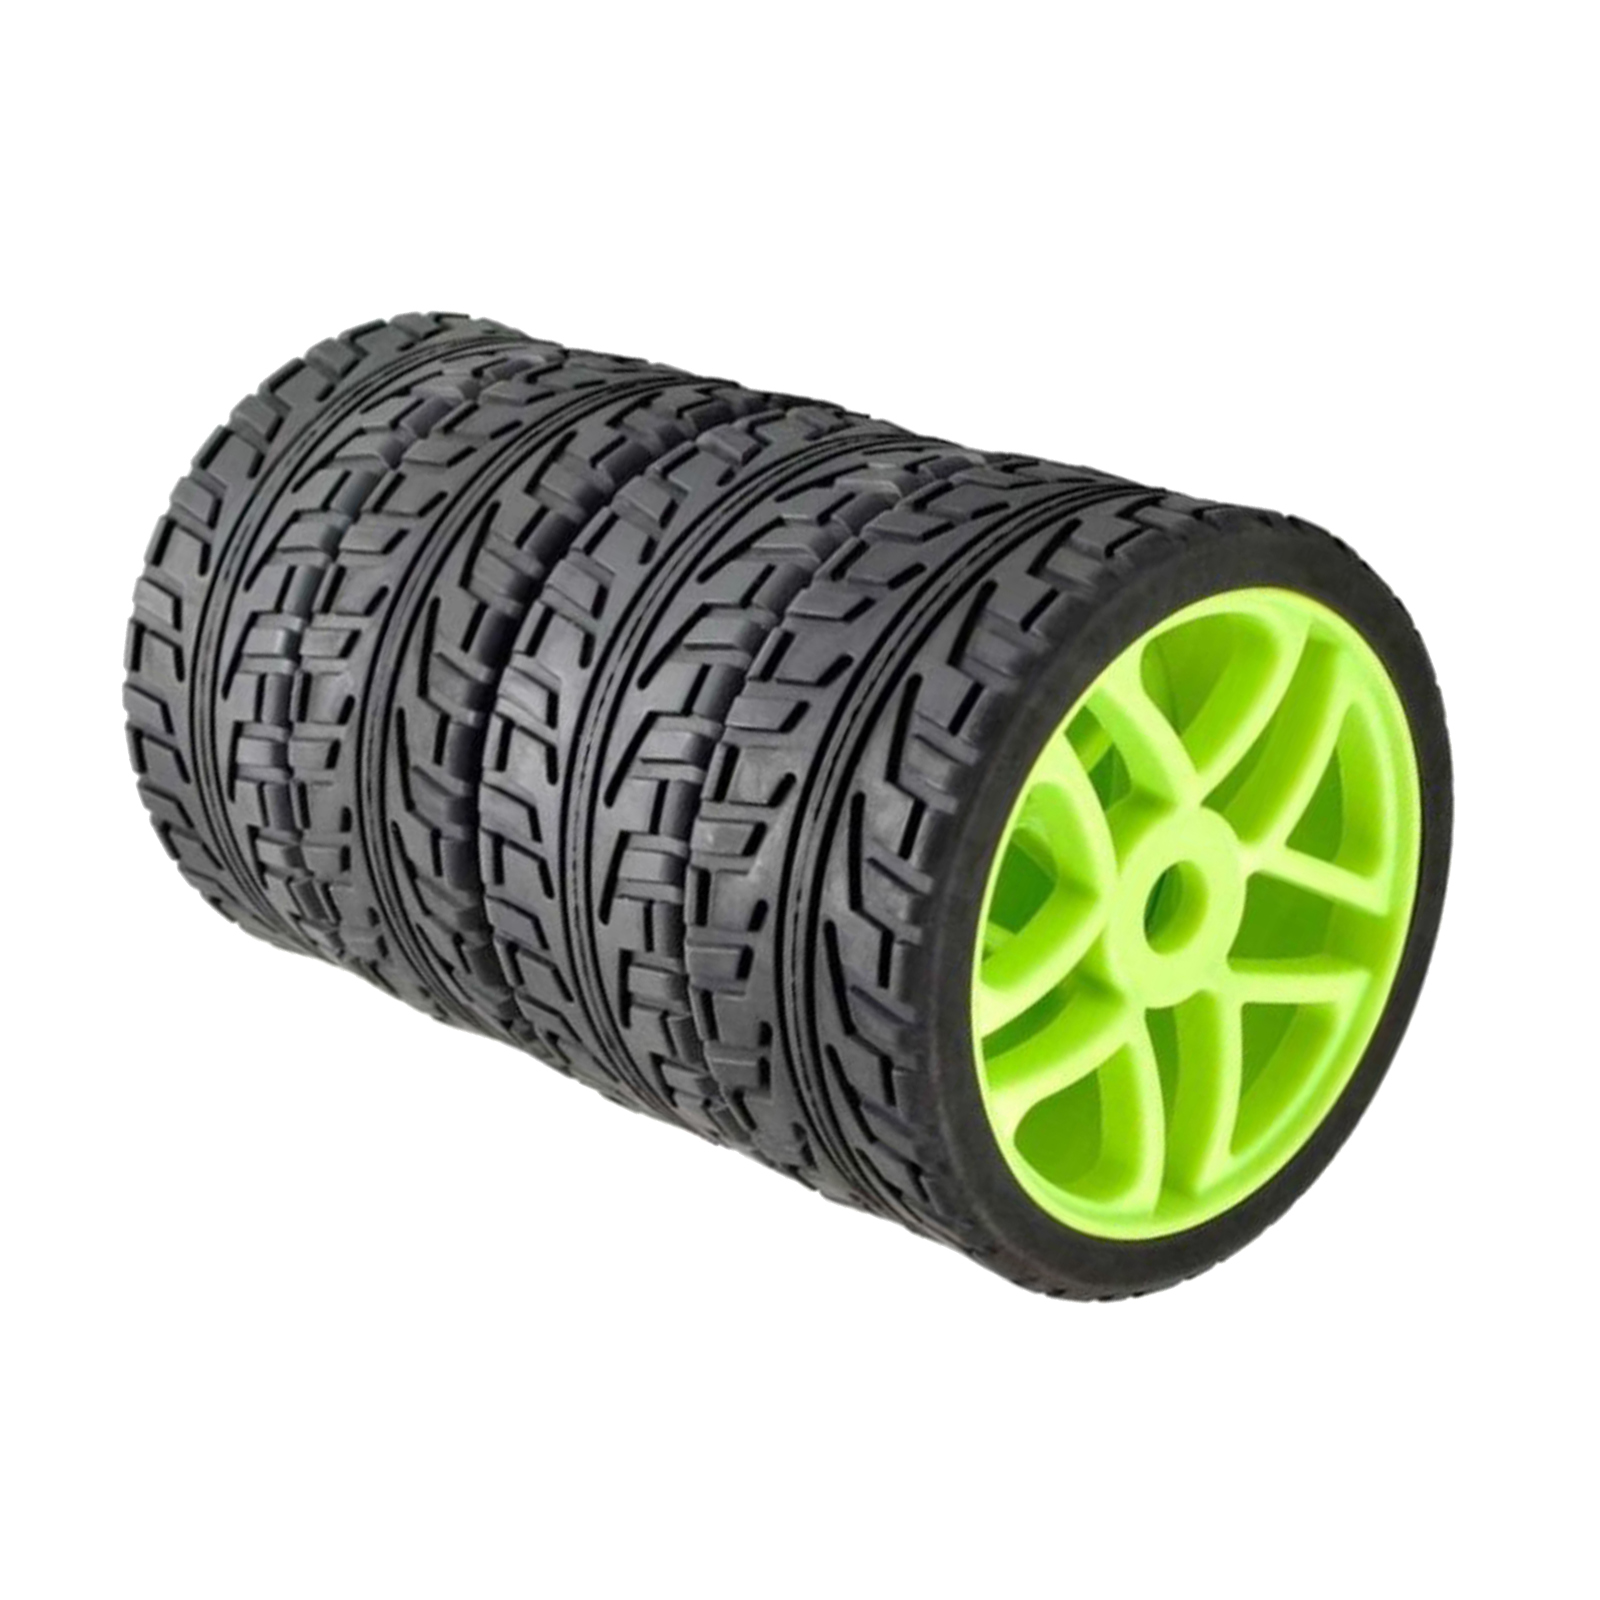 RC Car Tire,4 PCs Resistant Rubber Tires for HSP 1/8 RC Truck Green 